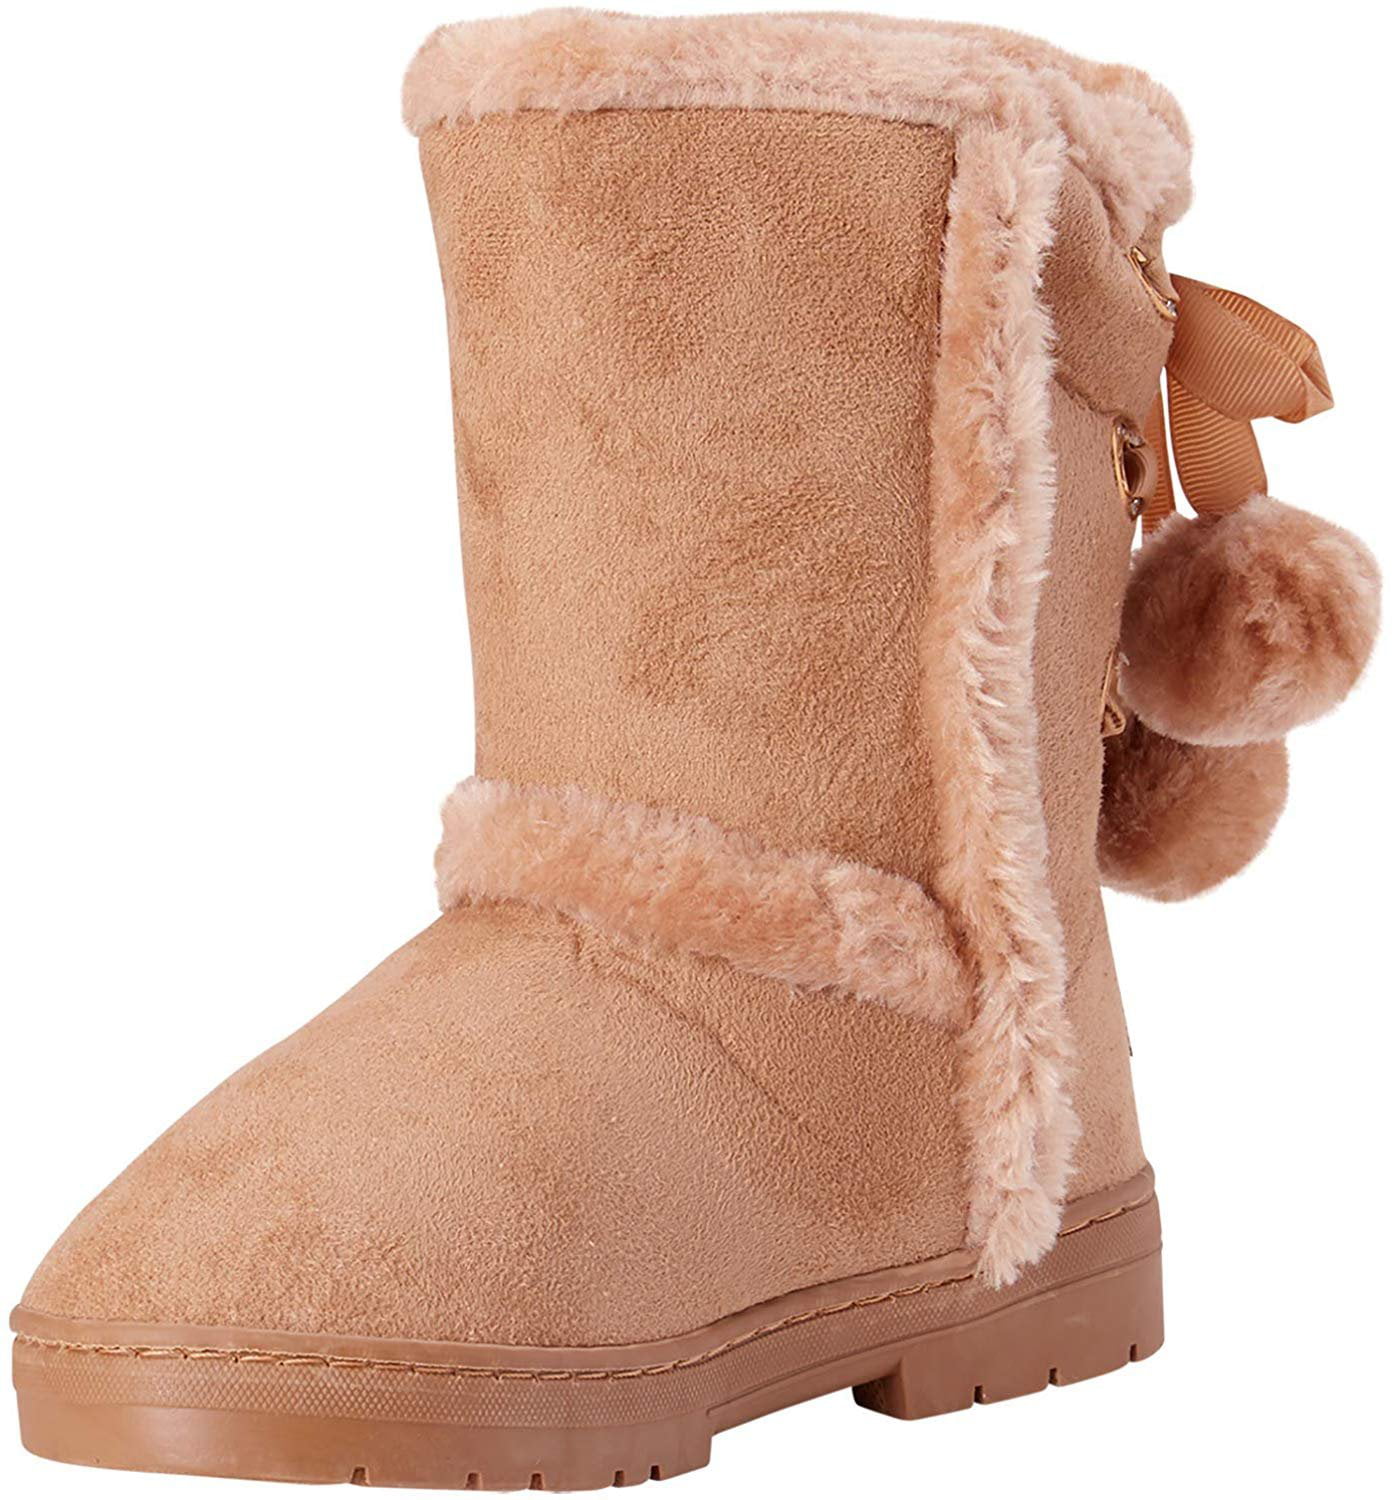 Childrens Unisex Spot On Snow Boots With Fur Trim 